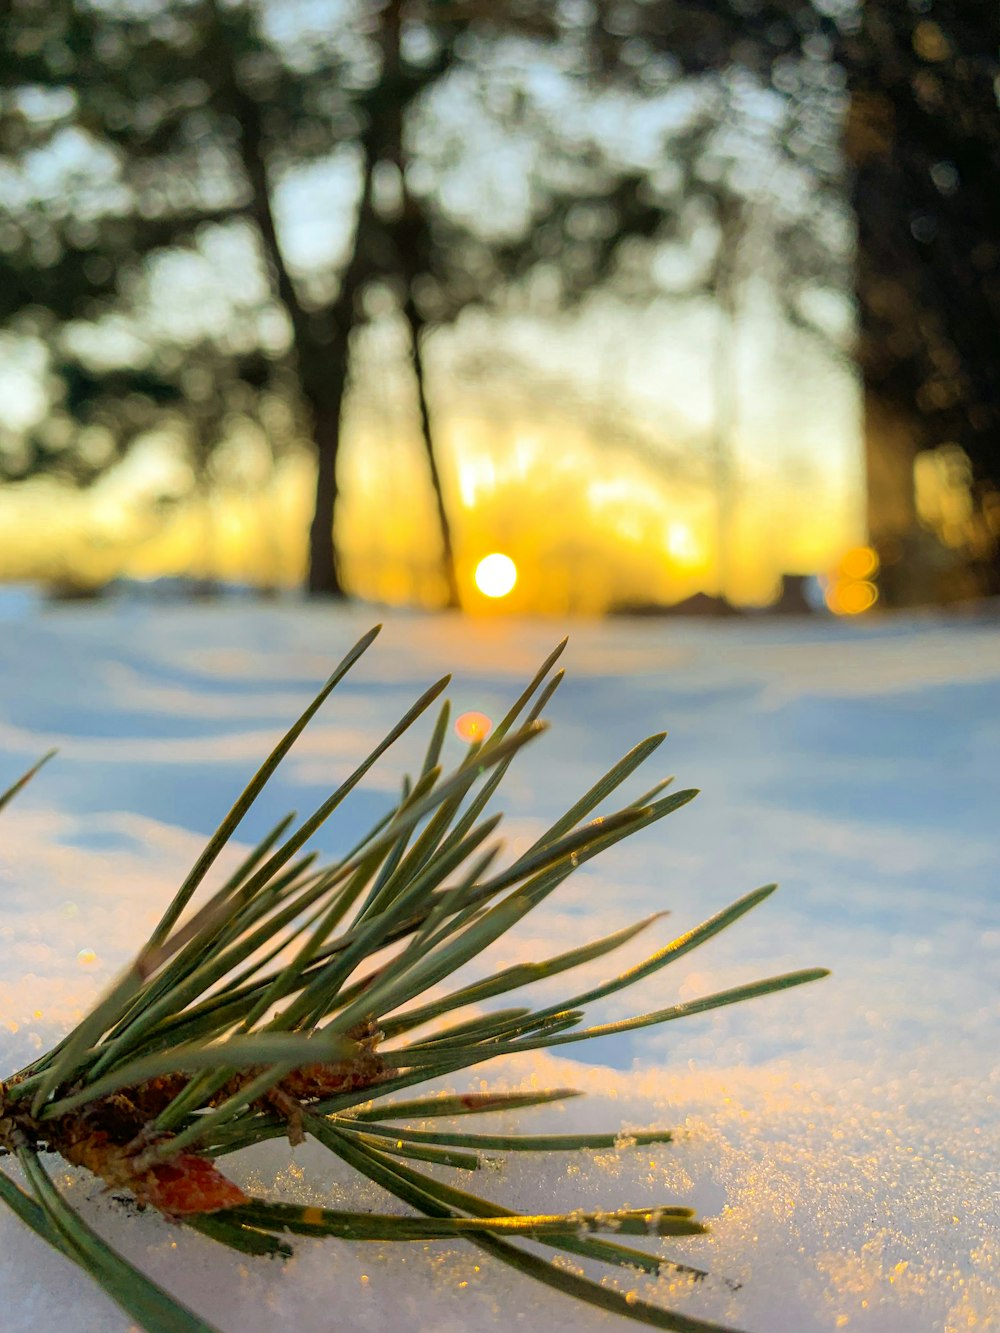 a pine tree branch laying in the snow